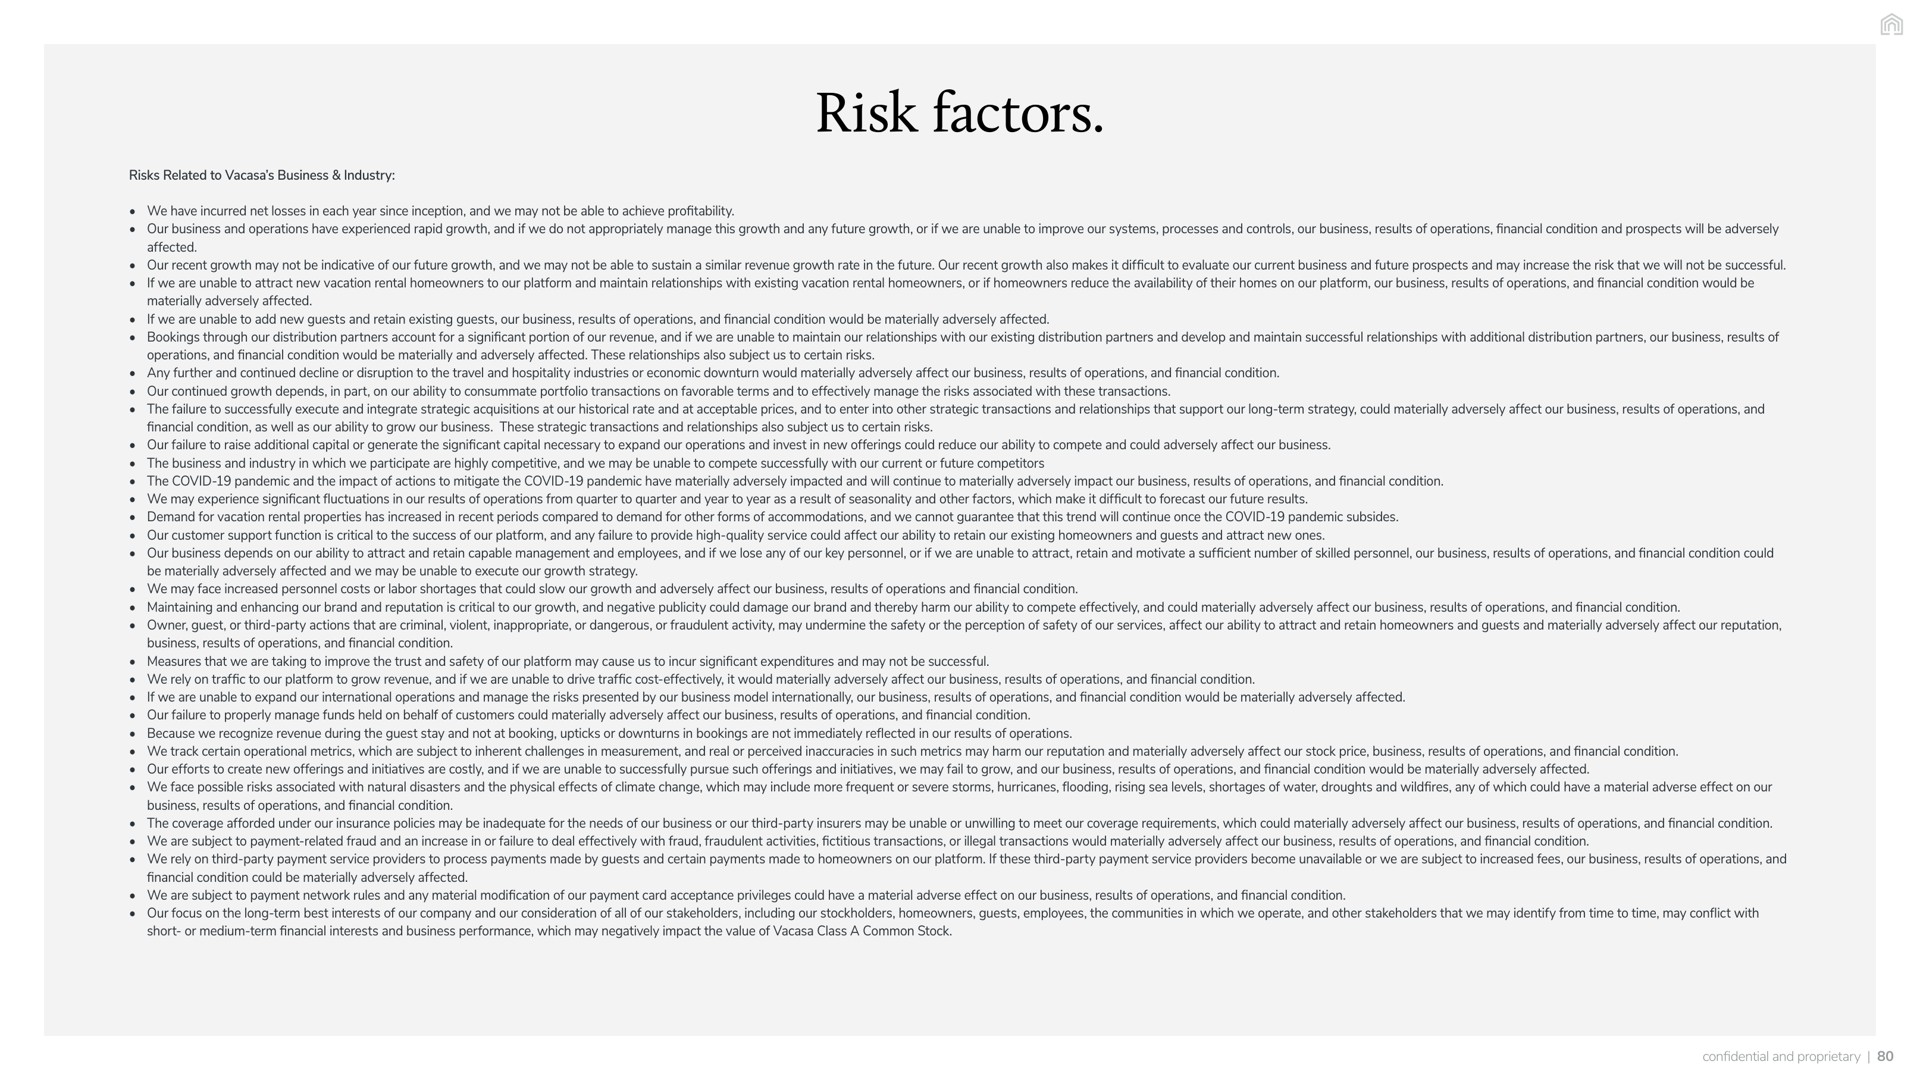 risk factors risks related to business industry we have incurred net losses in each year since inception and we may not be able to achieve profitability our business and operations have experienced rapid growth and if we do not appropriately manage this growth and any future growth or if we are unable to improve our systems processes and controls our business results of operations financial condition and prospects will be adversely affected our recent growth may not be indicative of our future growth and we may not be able to sustain a similar revenue growth rate in the future our recent growth also makes it difficult to evaluate our current business and future prospects and may increase the that we will not be successful if we are unable to attract new vacation rental homeowners to our platform and maintain relationships with existing vacation rental homeowners or if homeowners reduce the availability of their homes on our platform our business results of operations and financial condition would be materially adversely affected if we are unable to add new guests and retain existing guests our business results of operations and financial condition would be materially adversely affected bookings through our distribution partners account for a significant portion of our revenue and if we are unable to maintain our relationships with our existing distribution partners and develop and maintain successful relationships with additional distribution partners our business results of operations and financial condition would be materially and adversely affected these relationships also subject us to certain risks any further and continued decline or disruption to the travel and hospitality industries or economic downturn would materially adversely affect our business results of operations and financial condition our continued growth depends in part on our ability to consummate portfolio transactions on favorable terms and to effectively manage the risks associated with these transactions the failure to successfully execute and integrate strategic acquisitions at our historical rate and at acceptable prices and to enter into other strategic transactions and relationships that support our long term strategy could materially adversely affect our business results of operations and financial condition as well as our ability to grow our business these strategic transactions and relationships also subject us to certain risks our failure to raise additional capital or generate the significant capital necessary to expand our operations and invest in new offerings could reduce our ability to compete and could adversely affect our business the business and industry in which we participate are highly competitive and we may be unable to compete successfully with our current or future competitors the covid pandemic and the impact of actions to mitigate the covid pandemic have materially adversely impacted and will continue to materially adversely impact our business results of operations and financial condition we may experience significant fluctuations in our results of operations from quarter to quarter and year to year as a result of seasonality and other which make it difficult to forecast our future results demand for vacation rental properties has increased in recent periods compared to demand for other forms of accommodations and we cannot guarantee that this trend will continue once the covid pandemic subsides our customer support function is critical to the success of our platform and any failure to provide high quality service could affect our ability to retain our existing homeowners and guests and attract new ones our business depends on our ability to attract and retain capable management and employees and if we lose any of our key personnel or if we are unable to attract retain and motivate a sufficient number of skilled personnel our business results of operations and financial condition could be materially adversely affected and we may be unable to execute our growth strategy we may face increased personnel costs or labor shortages that could slow our growth and adversely affect our business results of operations and financial condition maintaining and enhancing our brand and reputation is critical to our growth and negative publicity could damage our brand and thereby harm our ability to compete effectively and could materially adversely affect our business results of operations and financial condition owner guest or third party actions that are criminal violent inappropriate or dangerous or fraudulent activity may undermine the safety or the perception of safety of our services affect our ability to attract and retain homeowners and guests and materially adversely affect our reputation business results of operations and financial condition measures that we are taking to improve the trust and safety of our platform may cause us to incur significant expenditures and may not be successful we rely on traffic to our platform to grow revenue and if we are unable to drive traffic cost effectively it would materially adversely affect our business results of operations and financial condition if we are unable to expand our international operations and manage the risks presented by our business model internationally our business results of operations and financial condition would be materially adversely affected our failure to properly manage funds held on behalf of customers could materially adversely affect our business results of operations and financial condition because we recognize revenue during the guest stay and not at booking or downturns in bookings are not immediately reflected in our results of operations we track certain operational metrics which are subject to inherent challenges in measurement and real or perceived inaccuracies in such metrics may harm our reputation and materially adversely affect our stock price business results of operations and financial condition our efforts to create new offerings and initiatives are costly and if we are unable to successfully pursue such offerings and initiatives we may fail to grow and our business results of operations and financial condition would be materially adversely affected we face possible risks associated with natural disasters and the physical effects of climate change which may include more frequent or severe storms hurricanes flooding rising sea levels shortages of water droughts and wildfires any of which could have a material adverse effect on our business results of operations and financial condition the coverage afforded under our insurance policies may be inadequate for the needs of our business or our third party insurers may be unable or unwilling to meet our coverage requirements which could materially adversely affect our business results of operations and financial condition we are subject to payment related fraud and an increase in or failure to deal effectively with fraud fraudulent activities fictitious transactions or illegal transactions would materially adversely affect our business results of operations and financial condition we rely on third party payment service providers to process payments made by guests and certain payments made to homeowners on our platform if these third party payment service providers become unavailable or we are subject to increased fees our business results of operations and financial condition could be materially adversely affected we are subject to payment network rules and any material modification of our payment card acceptance privileges could have a material adverse effect on our business results of operations and financial condition our focus on the long term best interests of our company and our consideration of all of our stakeholders including our stockholders homeowners guests employees the communities in which we operate and other stakeholders that we may identify from time to time may conflict with short or medium term financial interests and business performance which may negatively impact the value of class a common stock and proprietary | Vacasa